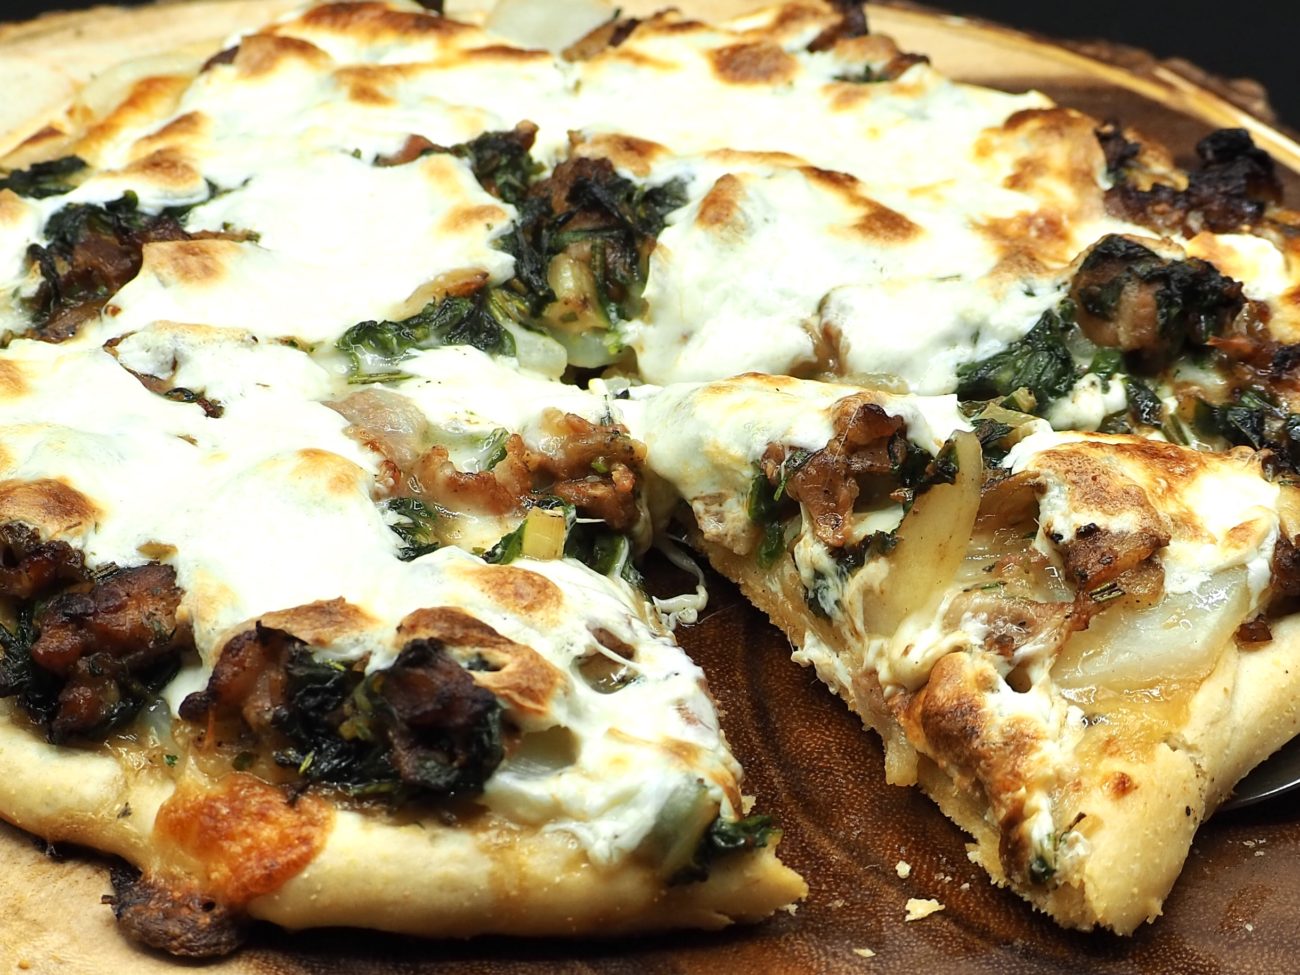 Rustic Potato, Shallot, Bacon and Swiss Chard Pizza – don’t judge the title until you taste it!!